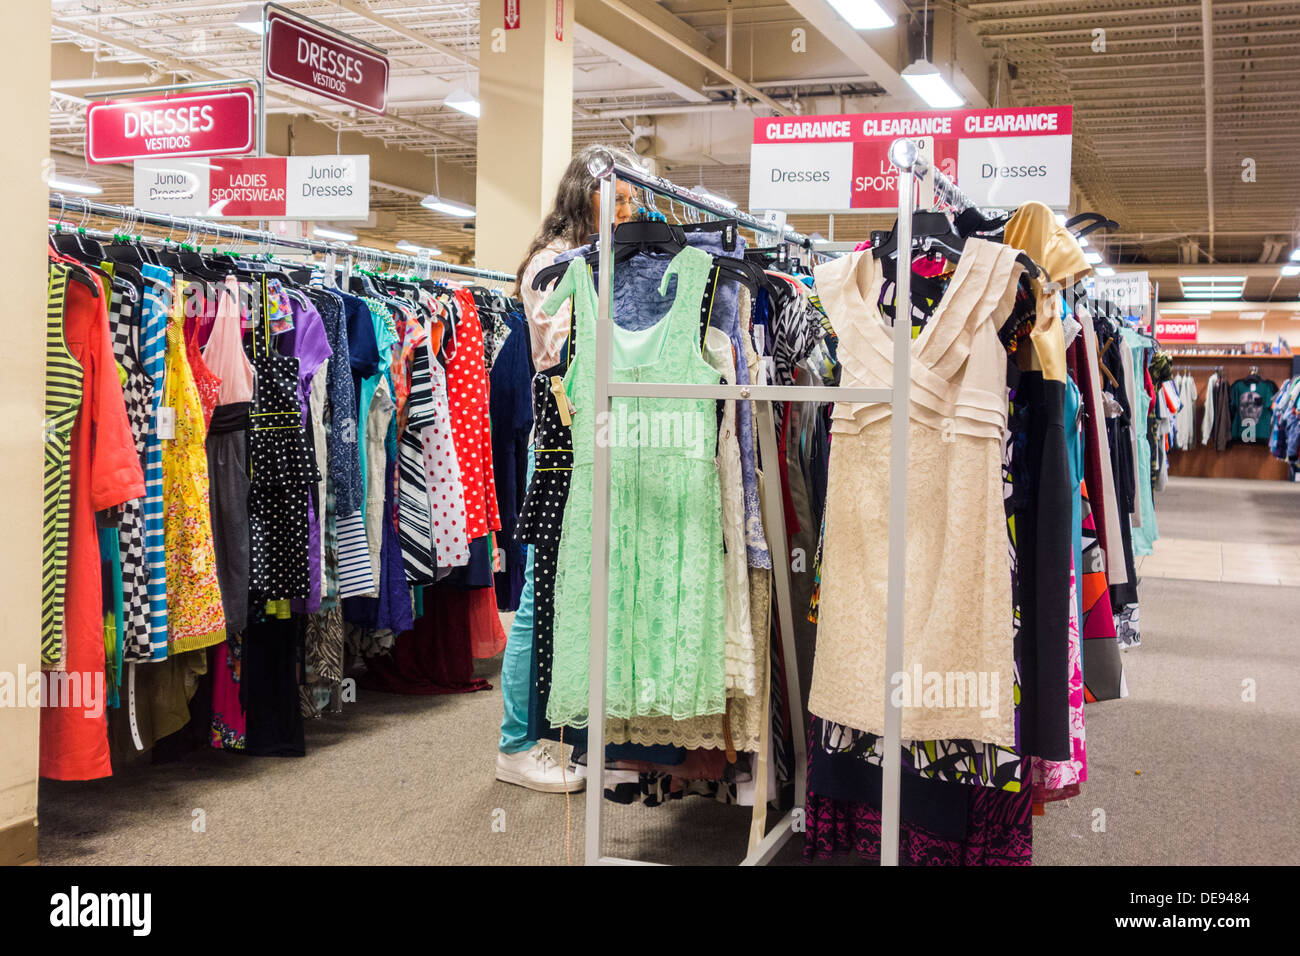 A woman browses a rack of dresses on sale in a discount department store in Oklahoma City, Oklahoma, USA. Stock Photo